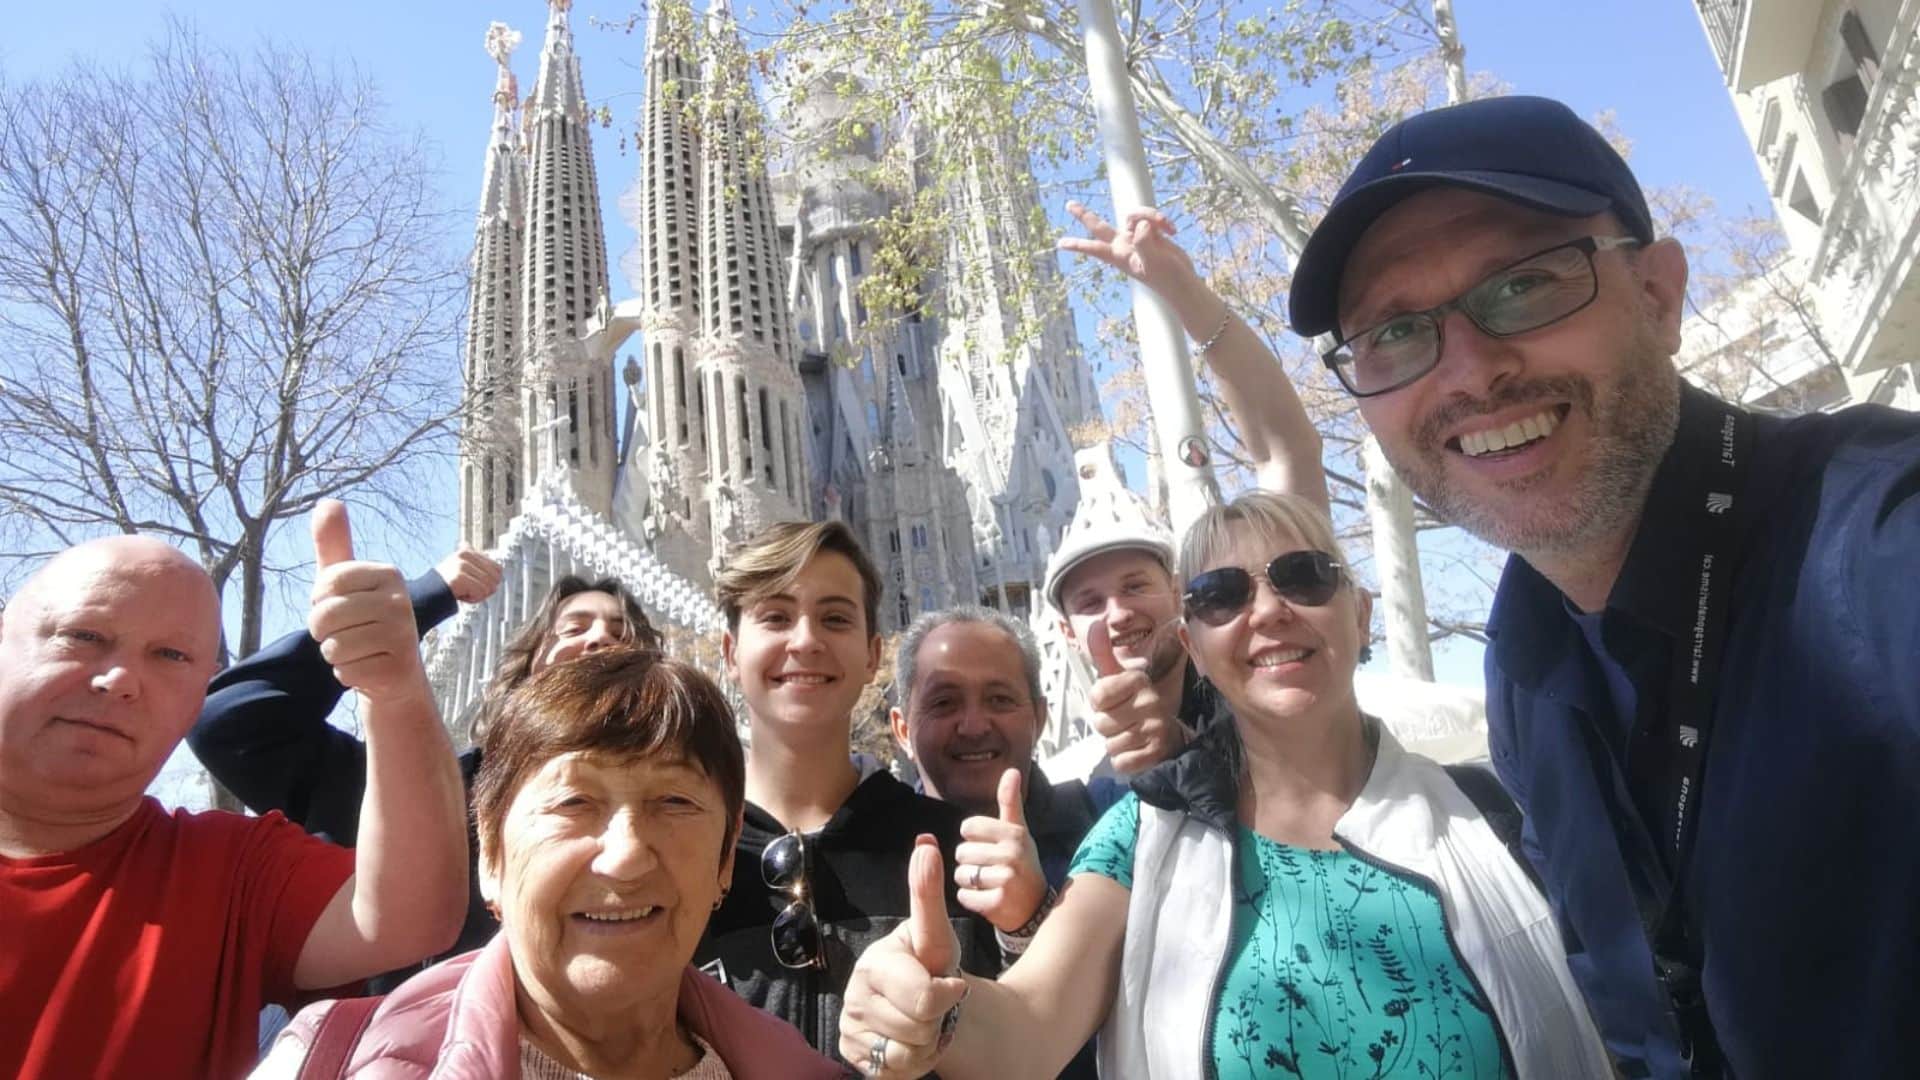 Gaudi's Modernist Legacy Walking Tour - In out Barcelona Tours